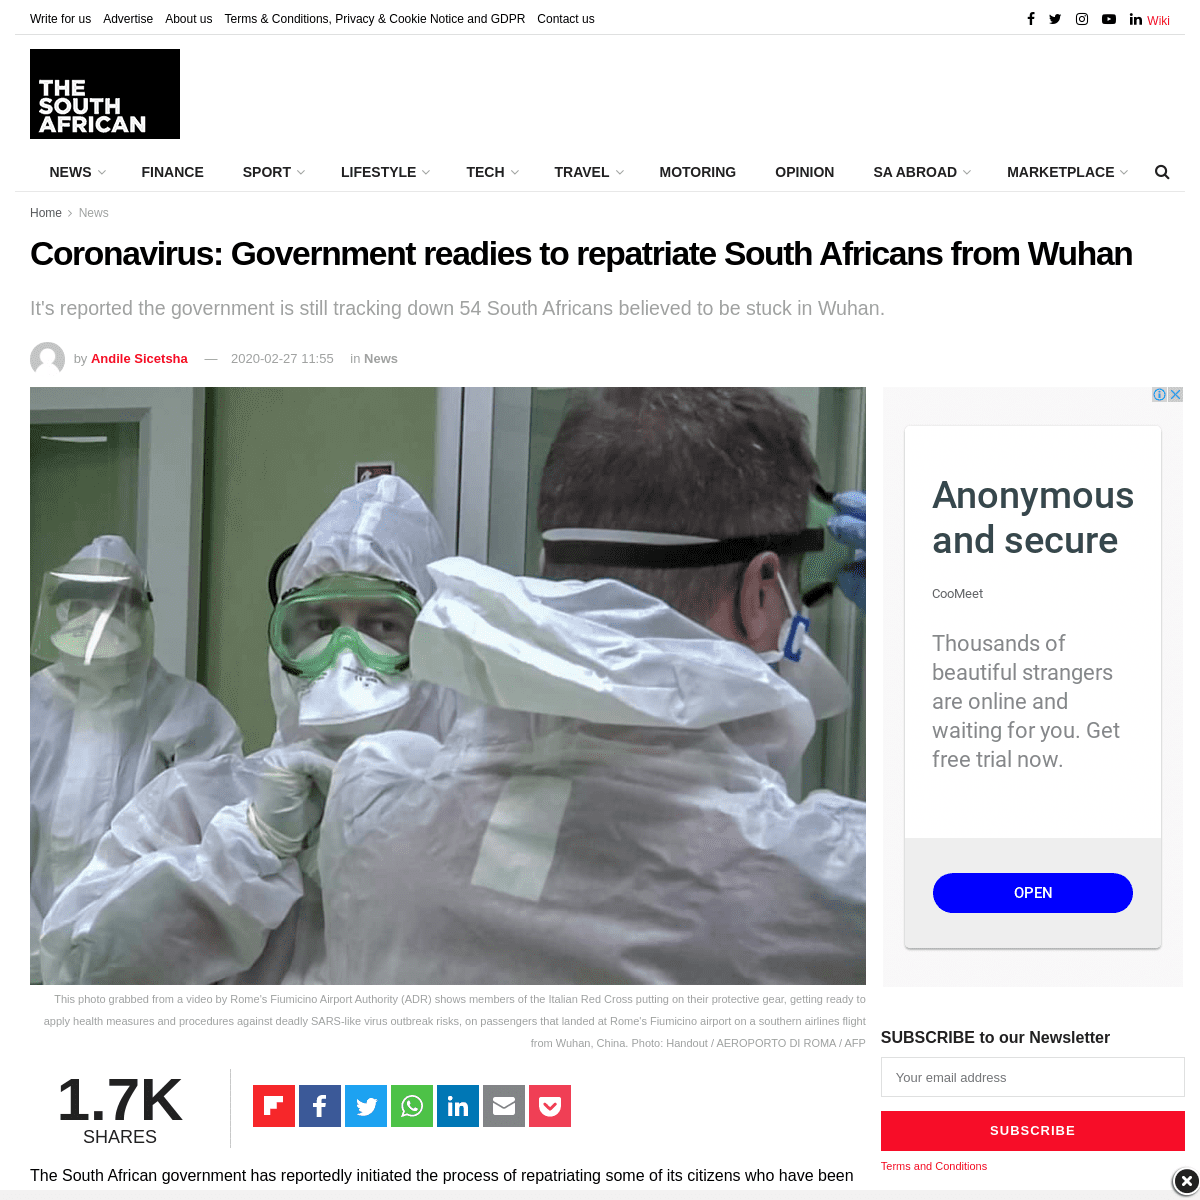 A complete backup of www.thesouthafrican.com/news/coronarivus-update-government-repatriates-south-africans-wuhan/